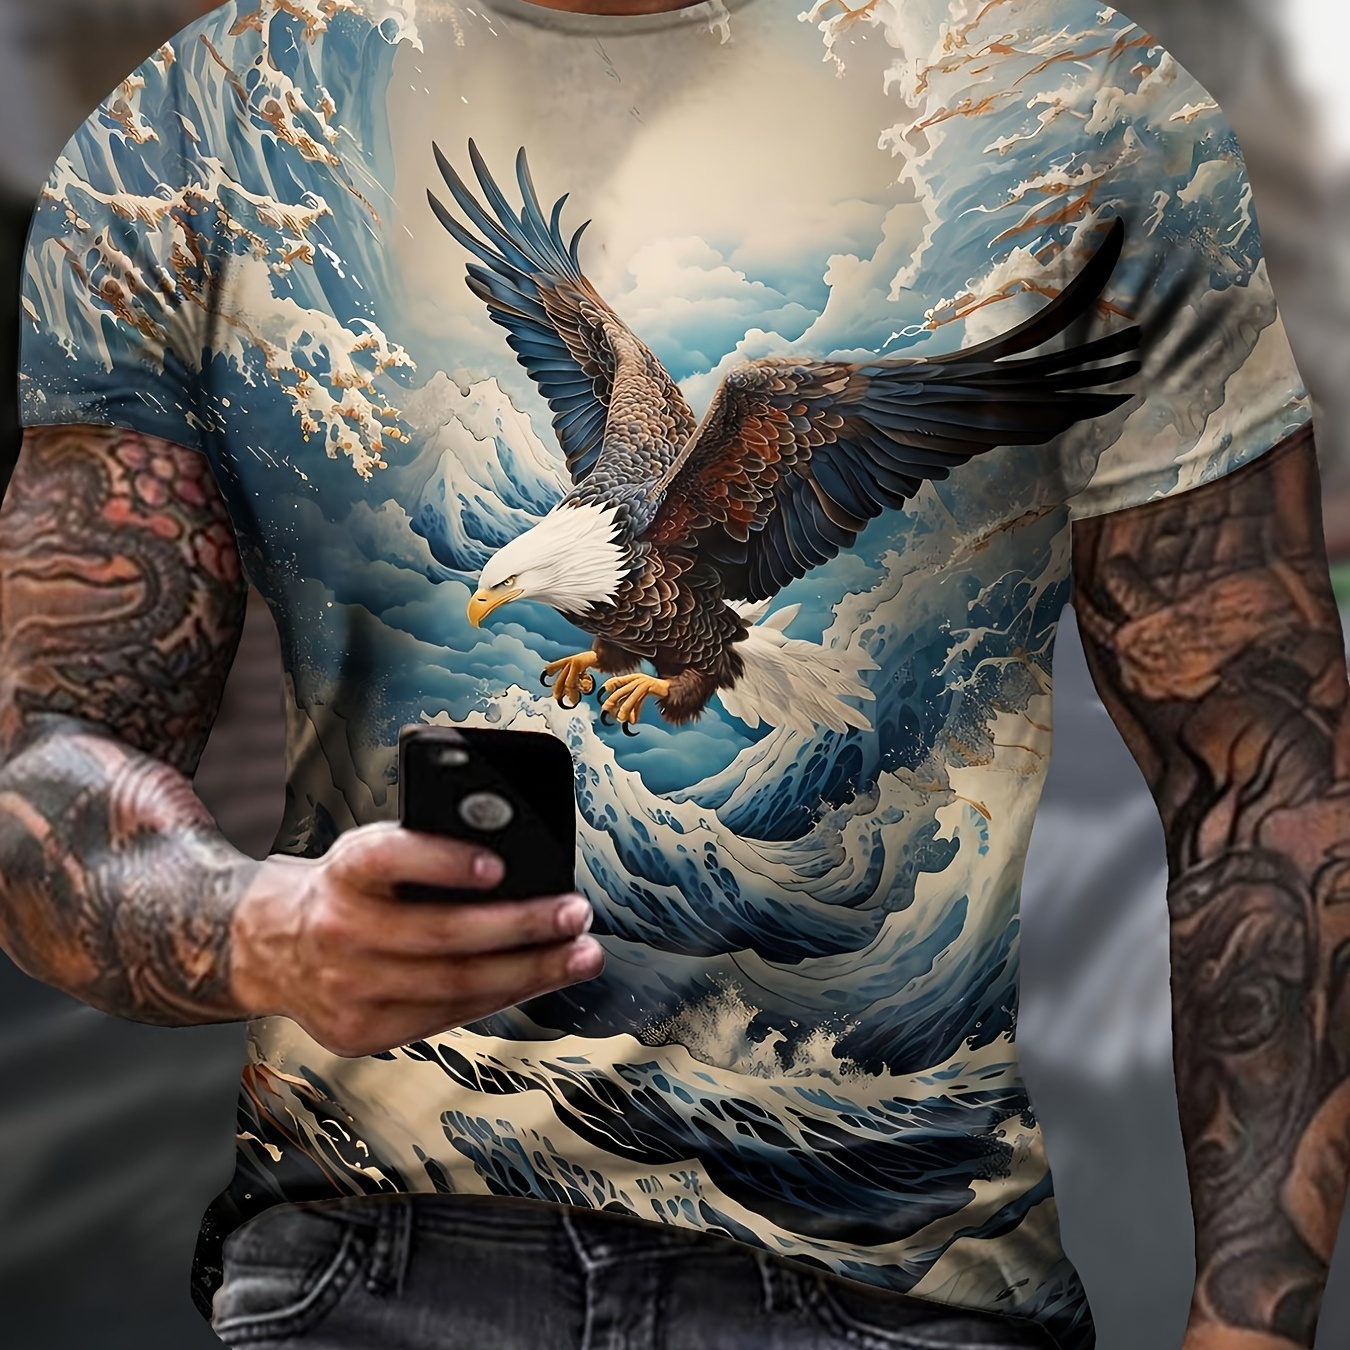 

Men's Comic Style Sea Themed Flying Eagle Pattern Print Crew Neck And Short Sleeve T-shirt, Novel And Stylish Tee For Men, Tops Suitable For Summer Outdoors And Sports Wear